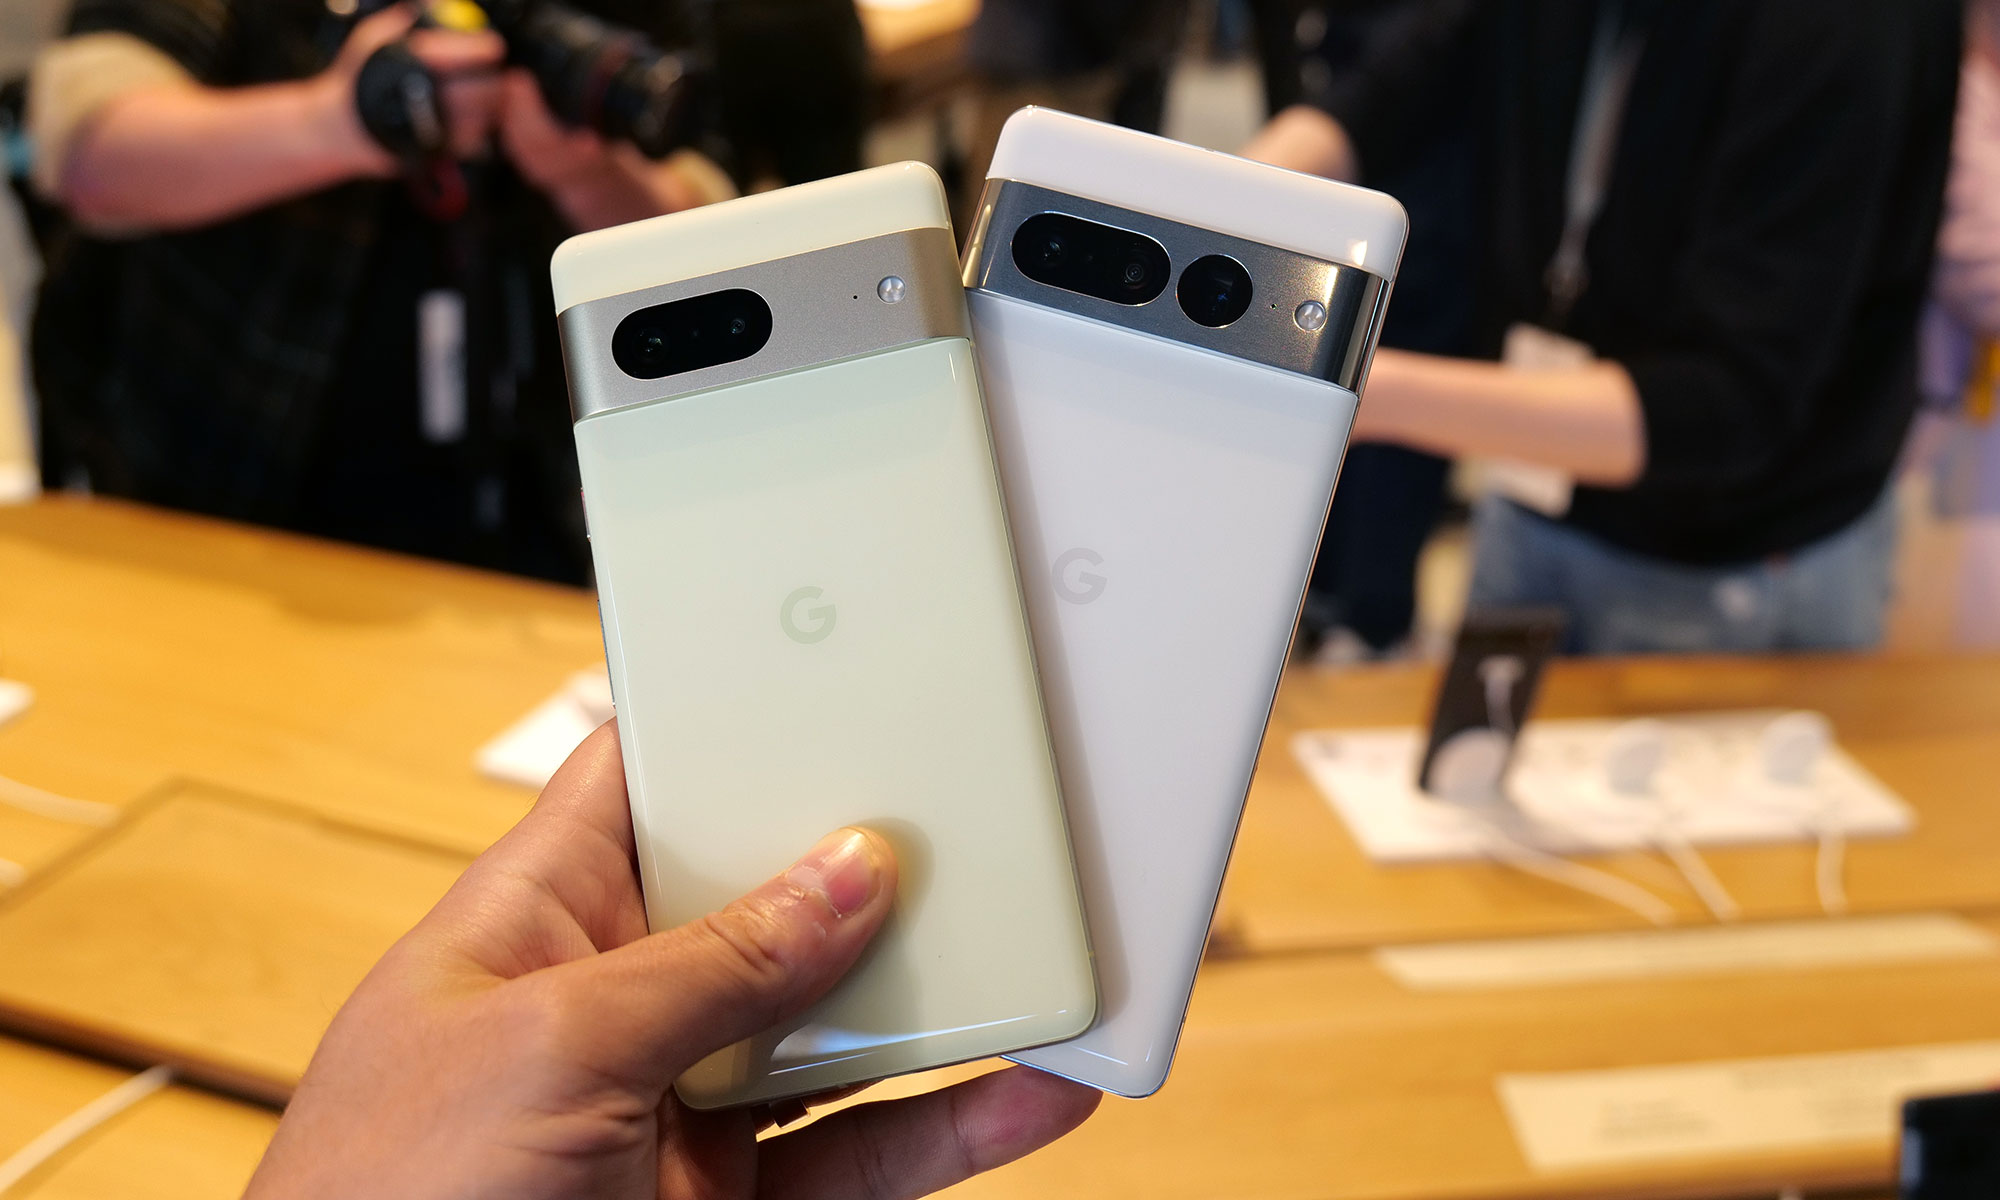 The new Pixel 7 and 7 Pro start at $599 and $899" data-uuid="9421a327-a51d-3caf-a505-841d2f037901